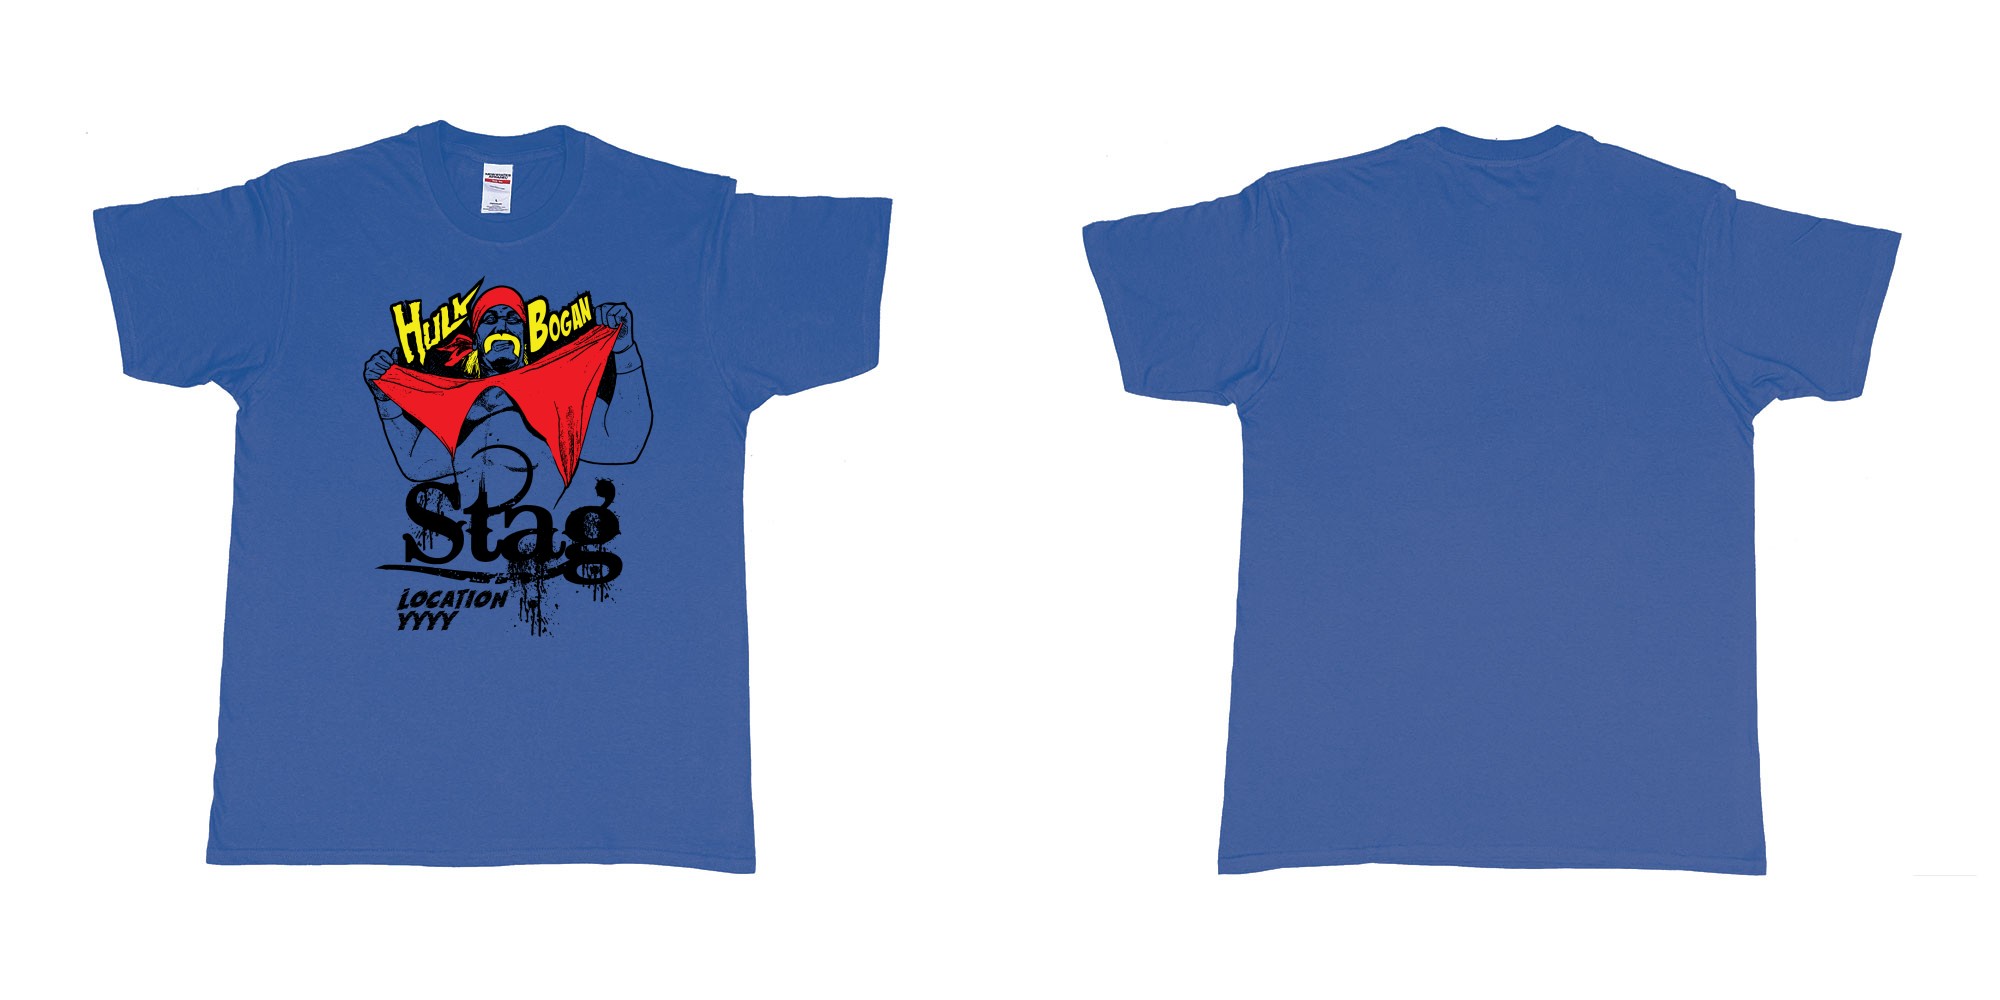 Custom tshirt design hulk hogan bogan in fabric color royal-blue choice your own text made in Bali by The Pirate Way